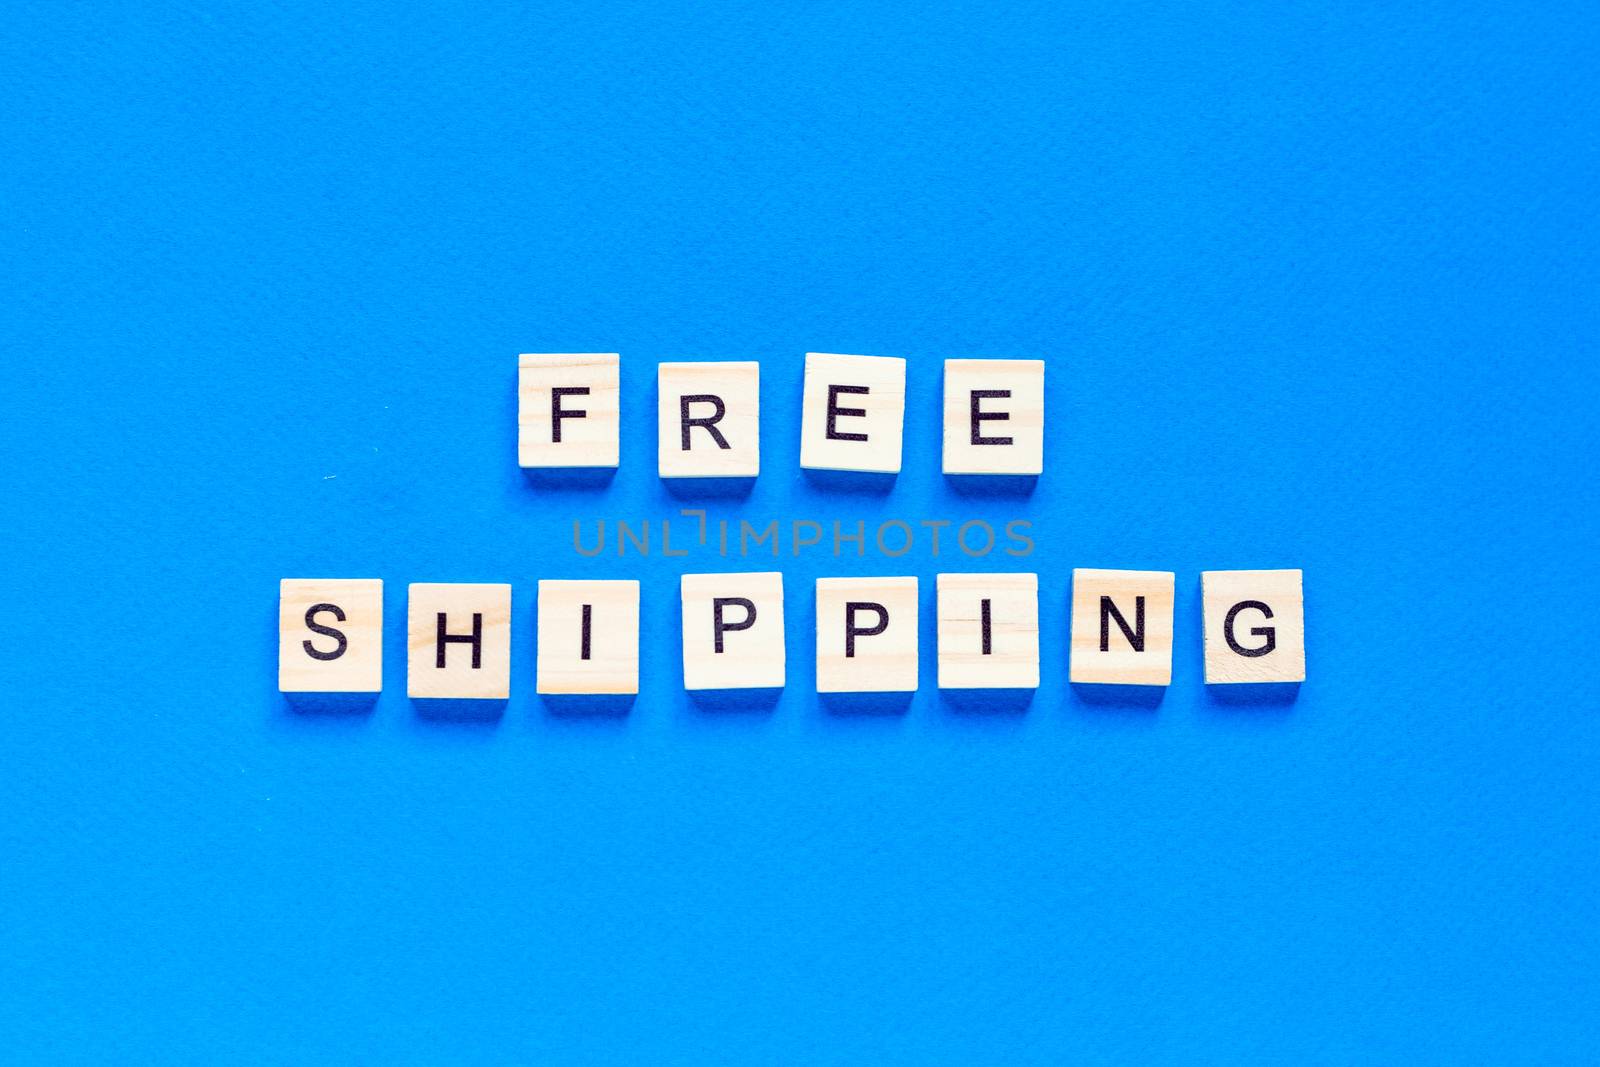 free shipping lettering in wooden letters on a blue background, top view. Service concept, delivery, contactless delivery, promotion, free of charge.